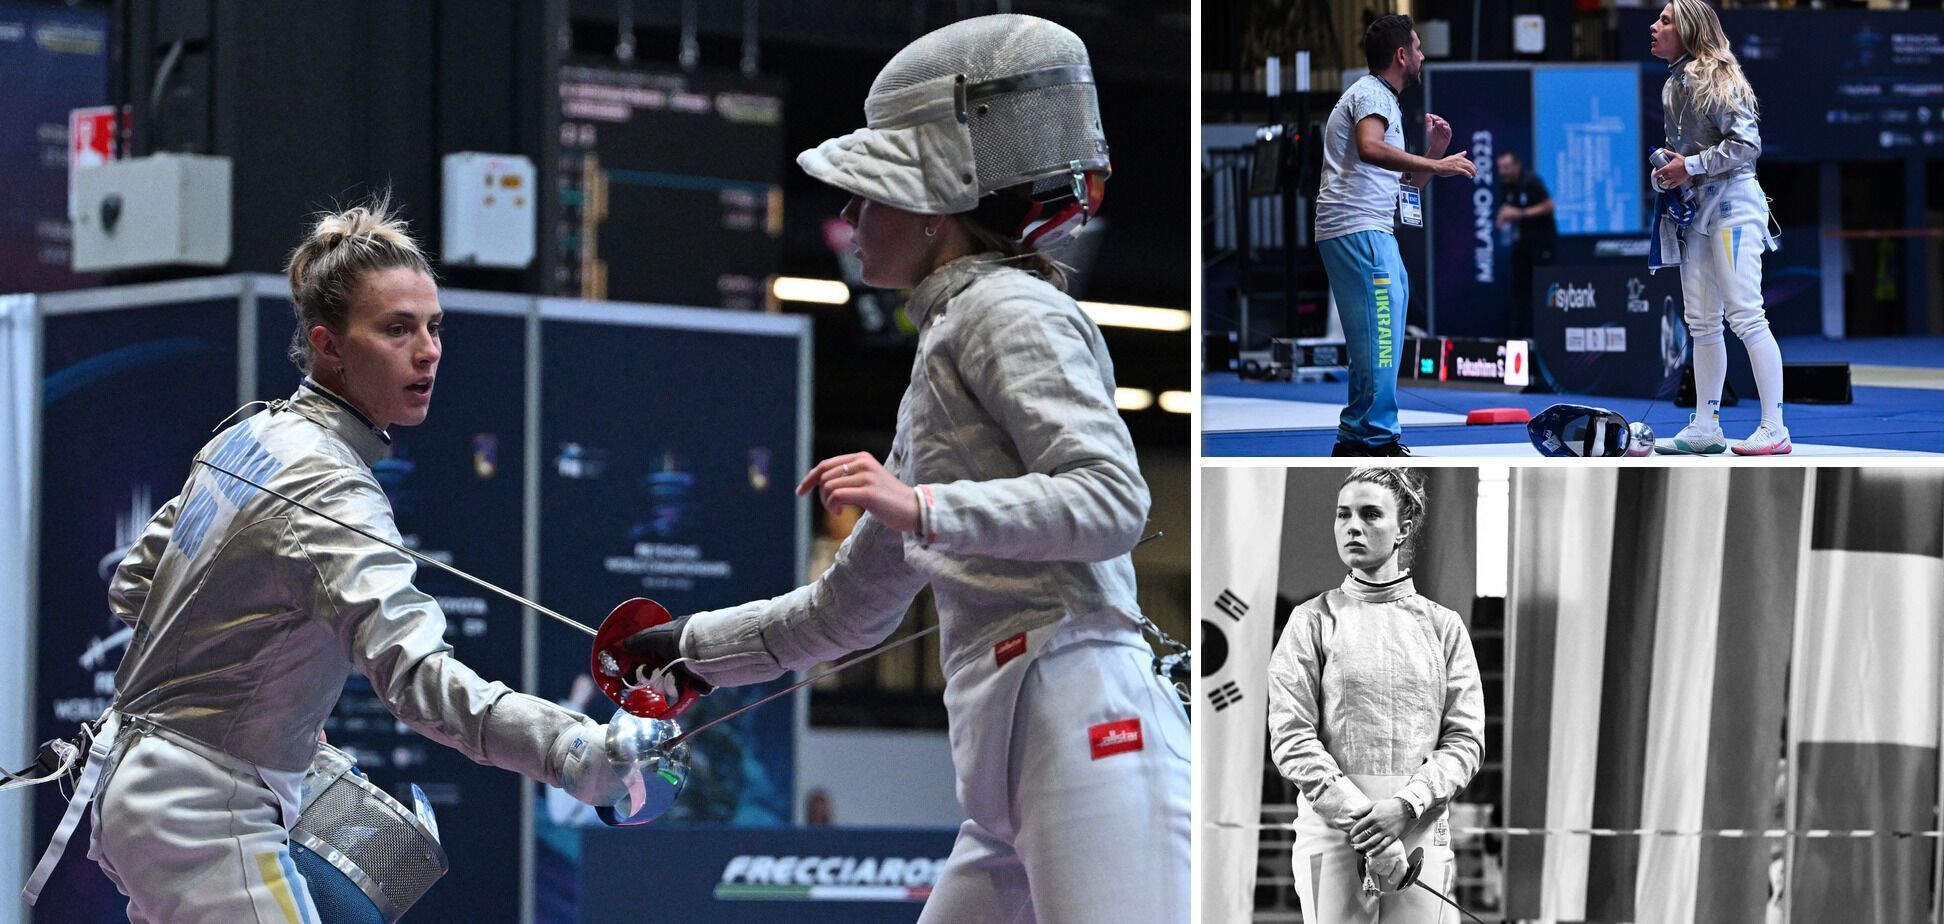 ''It killed me. I was screaming in pain.'' Harlan commented for the first time on what happened at the Fencing World Cup